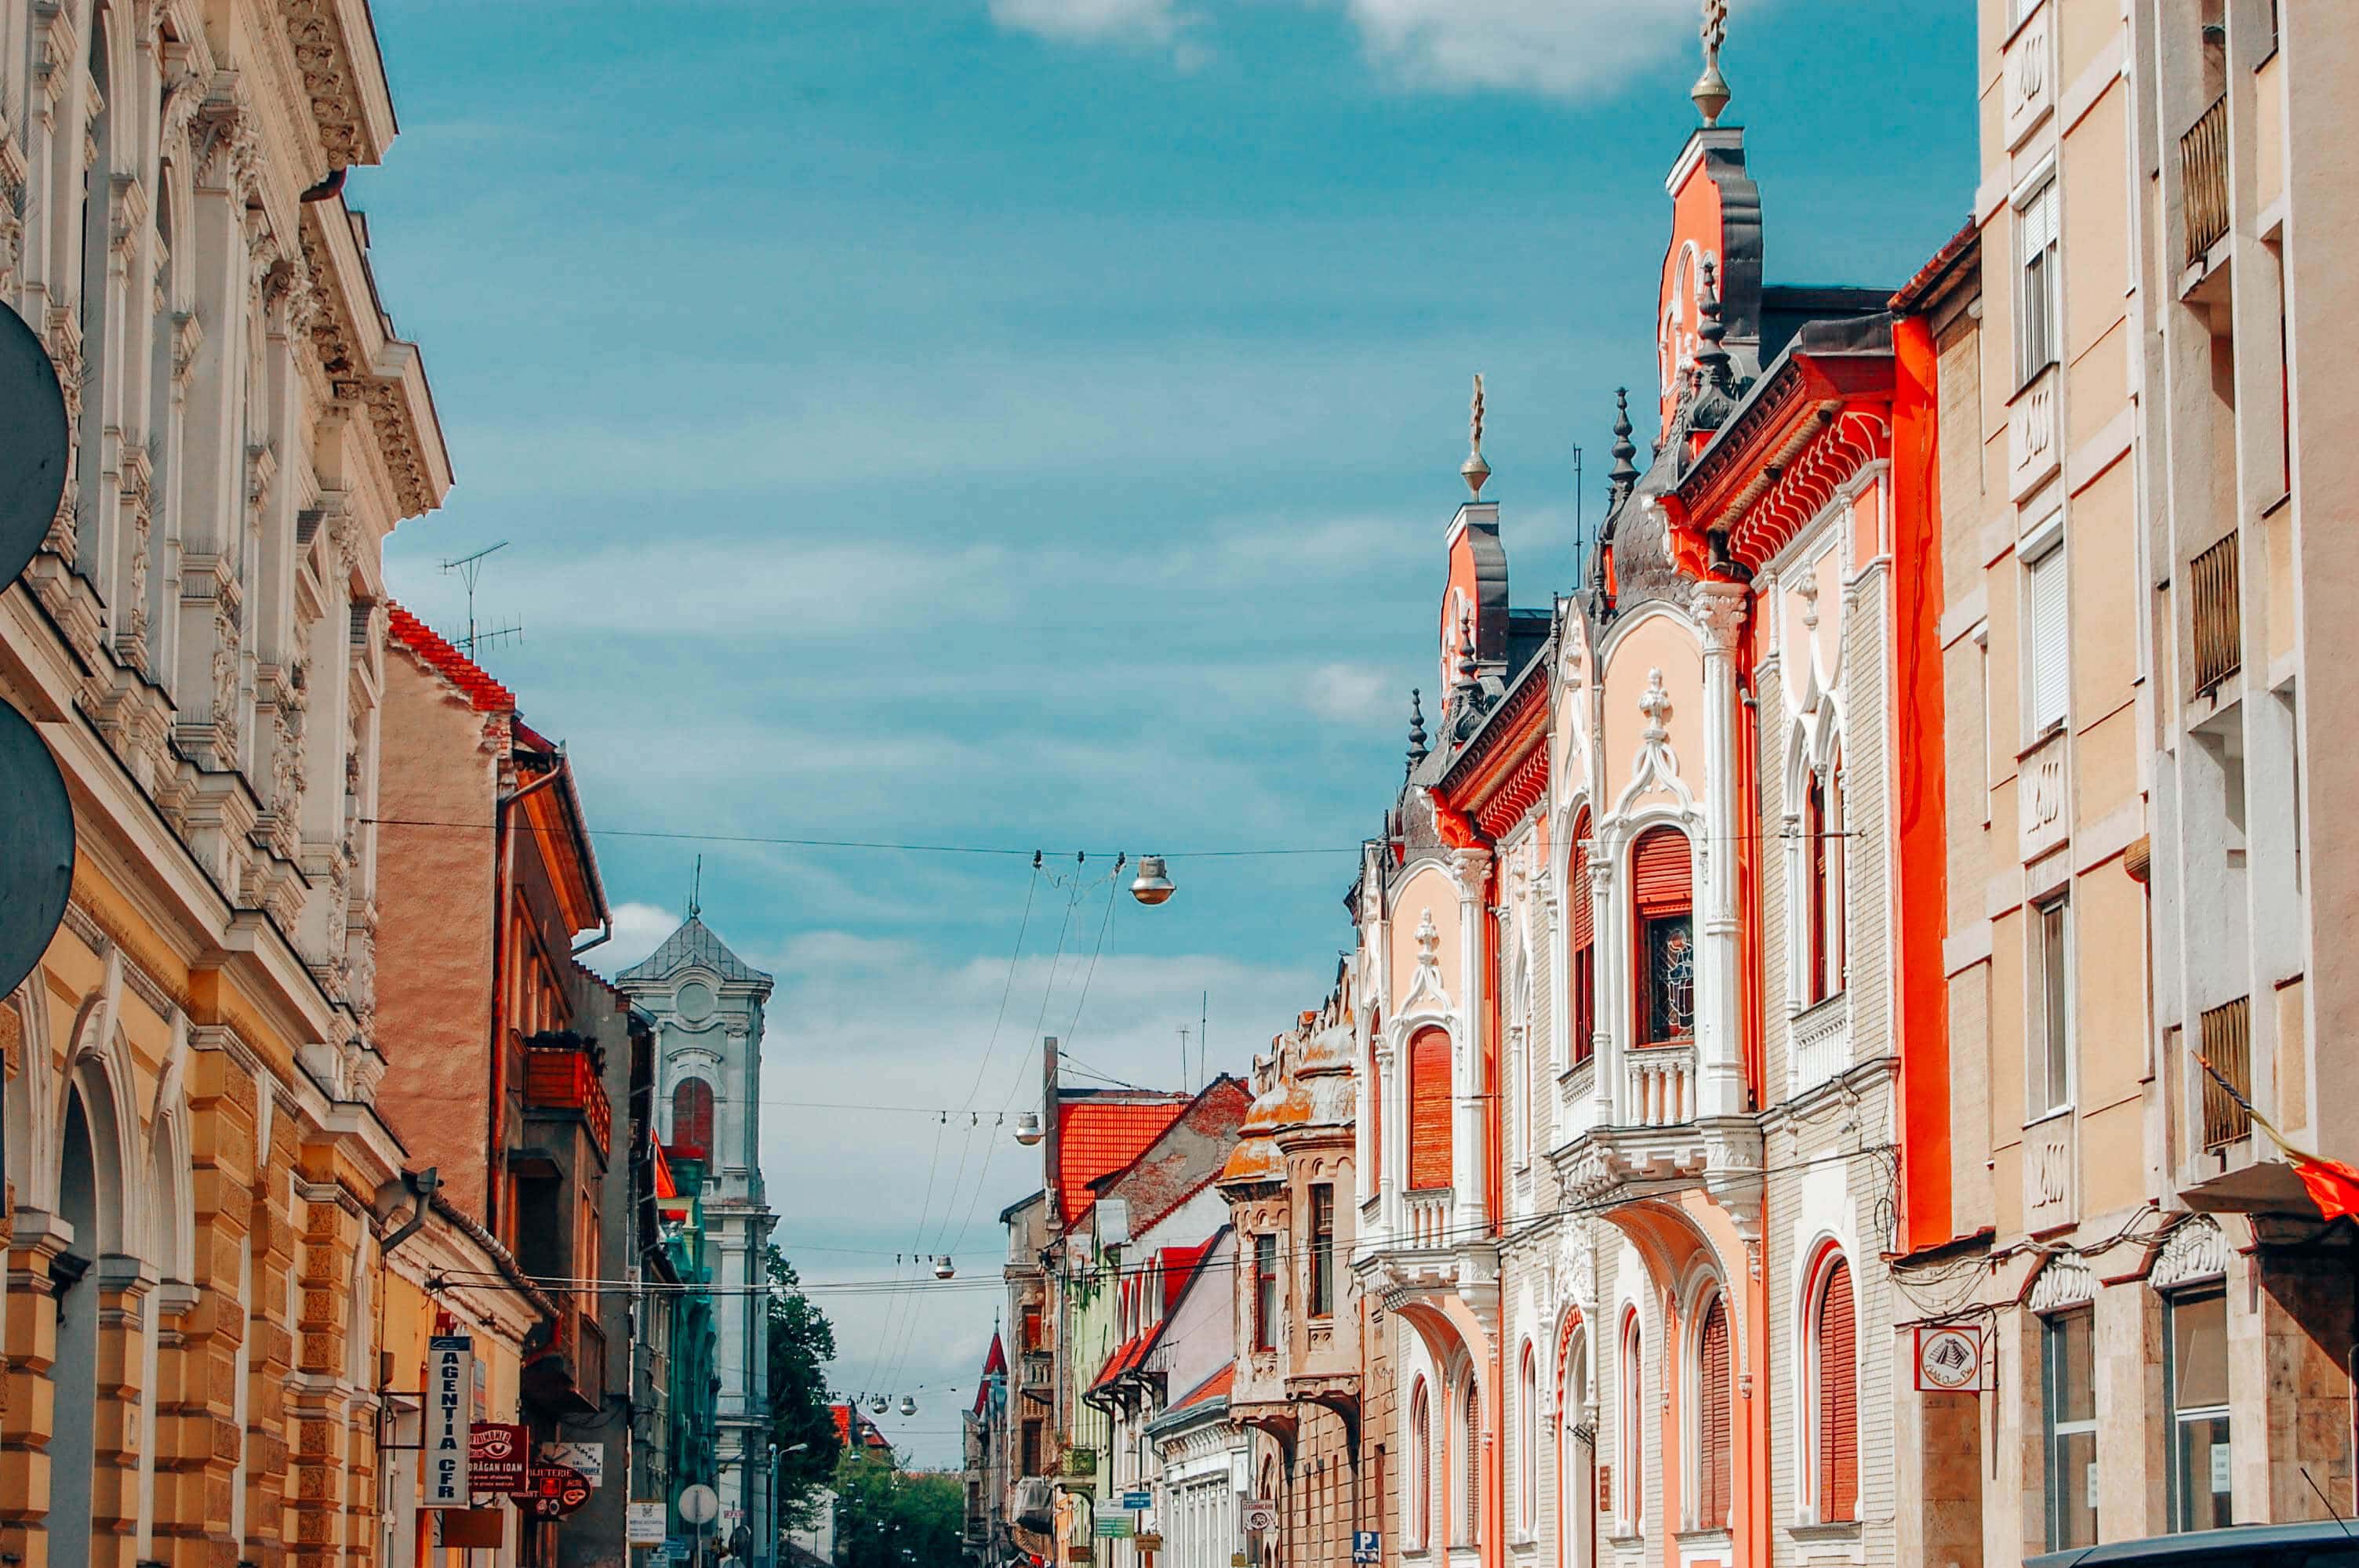 Oradea, Romania - One of the most underrated cities in the world + why you should add it to your bucket list low!